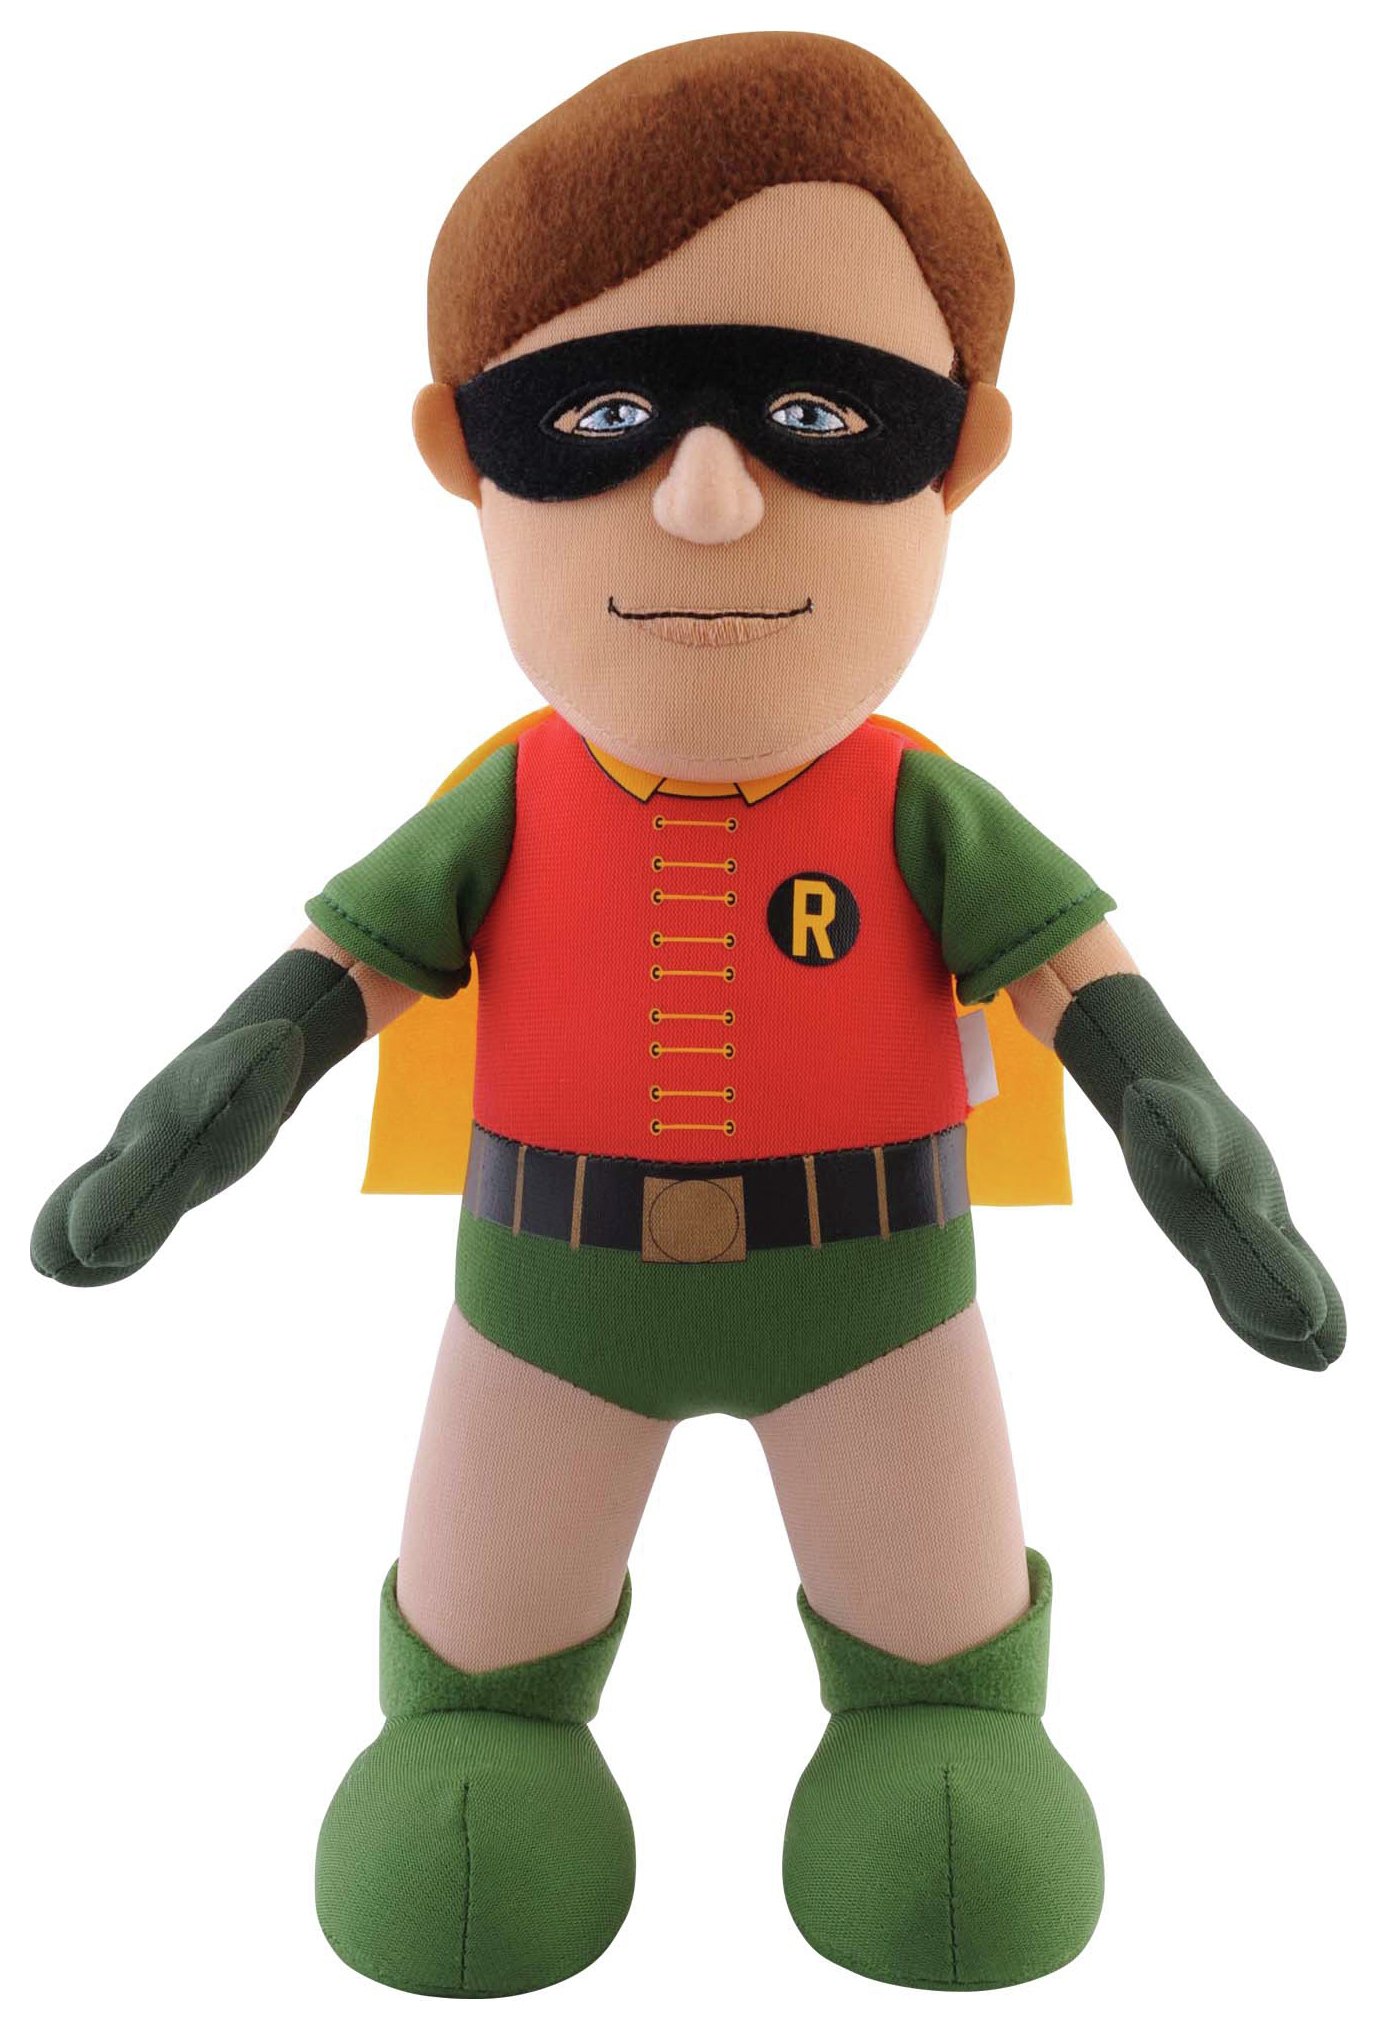 Robin - Creature - Plush Toy Review